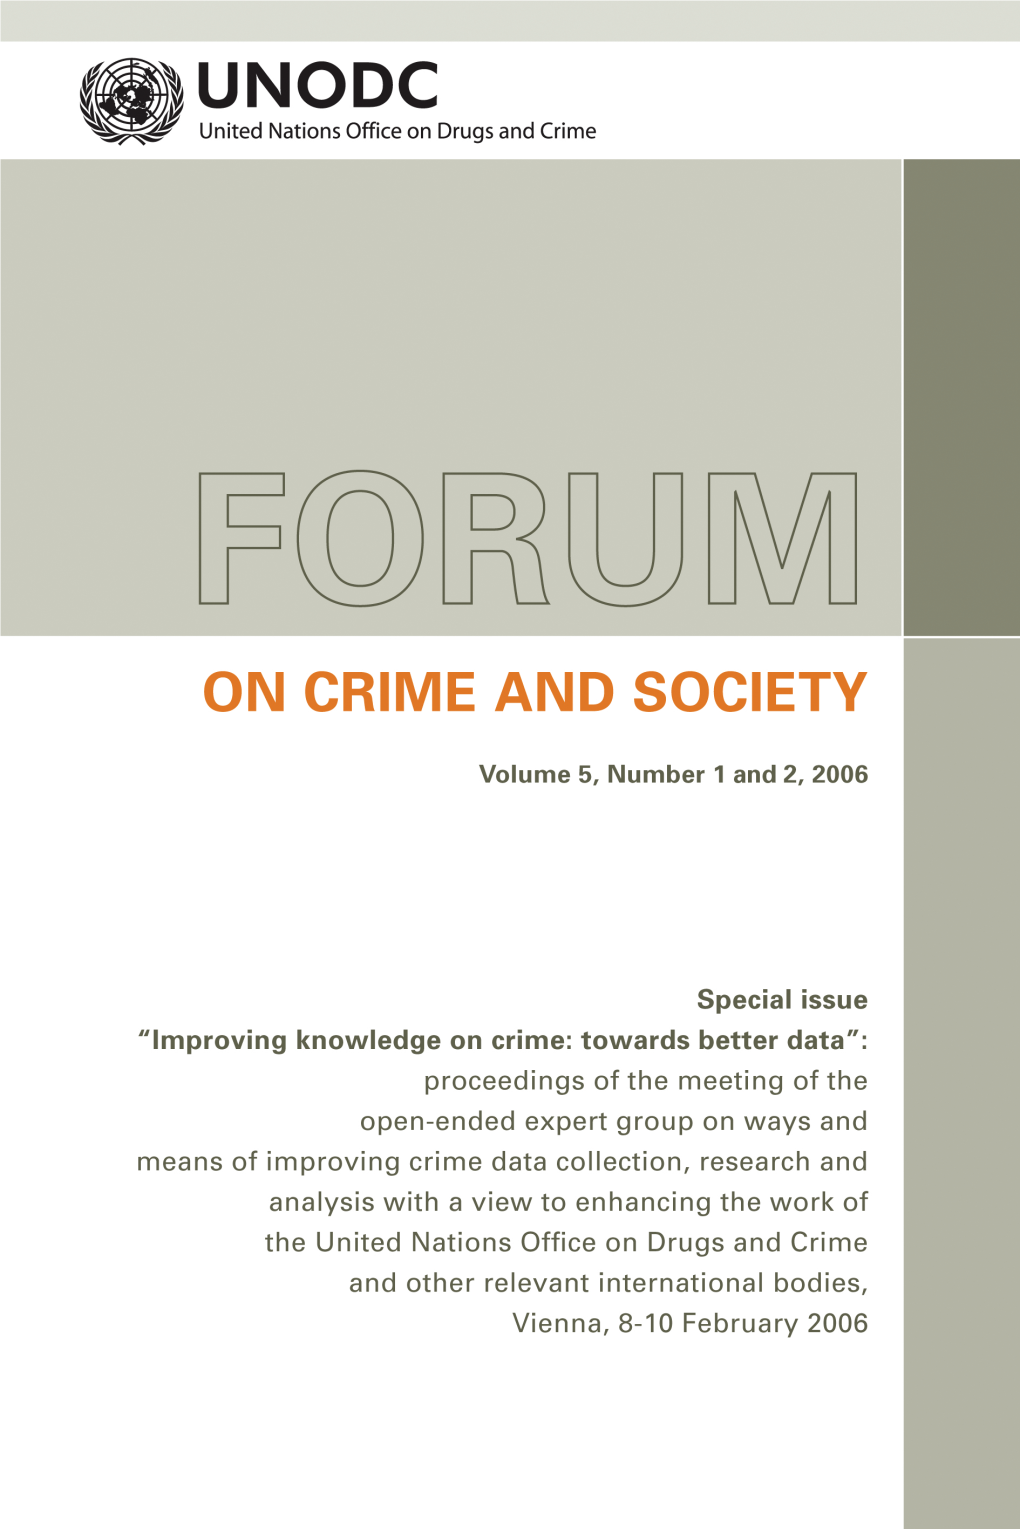 FORUM on CRIME and SOCIETY, Volume 5, Number 1, 2006